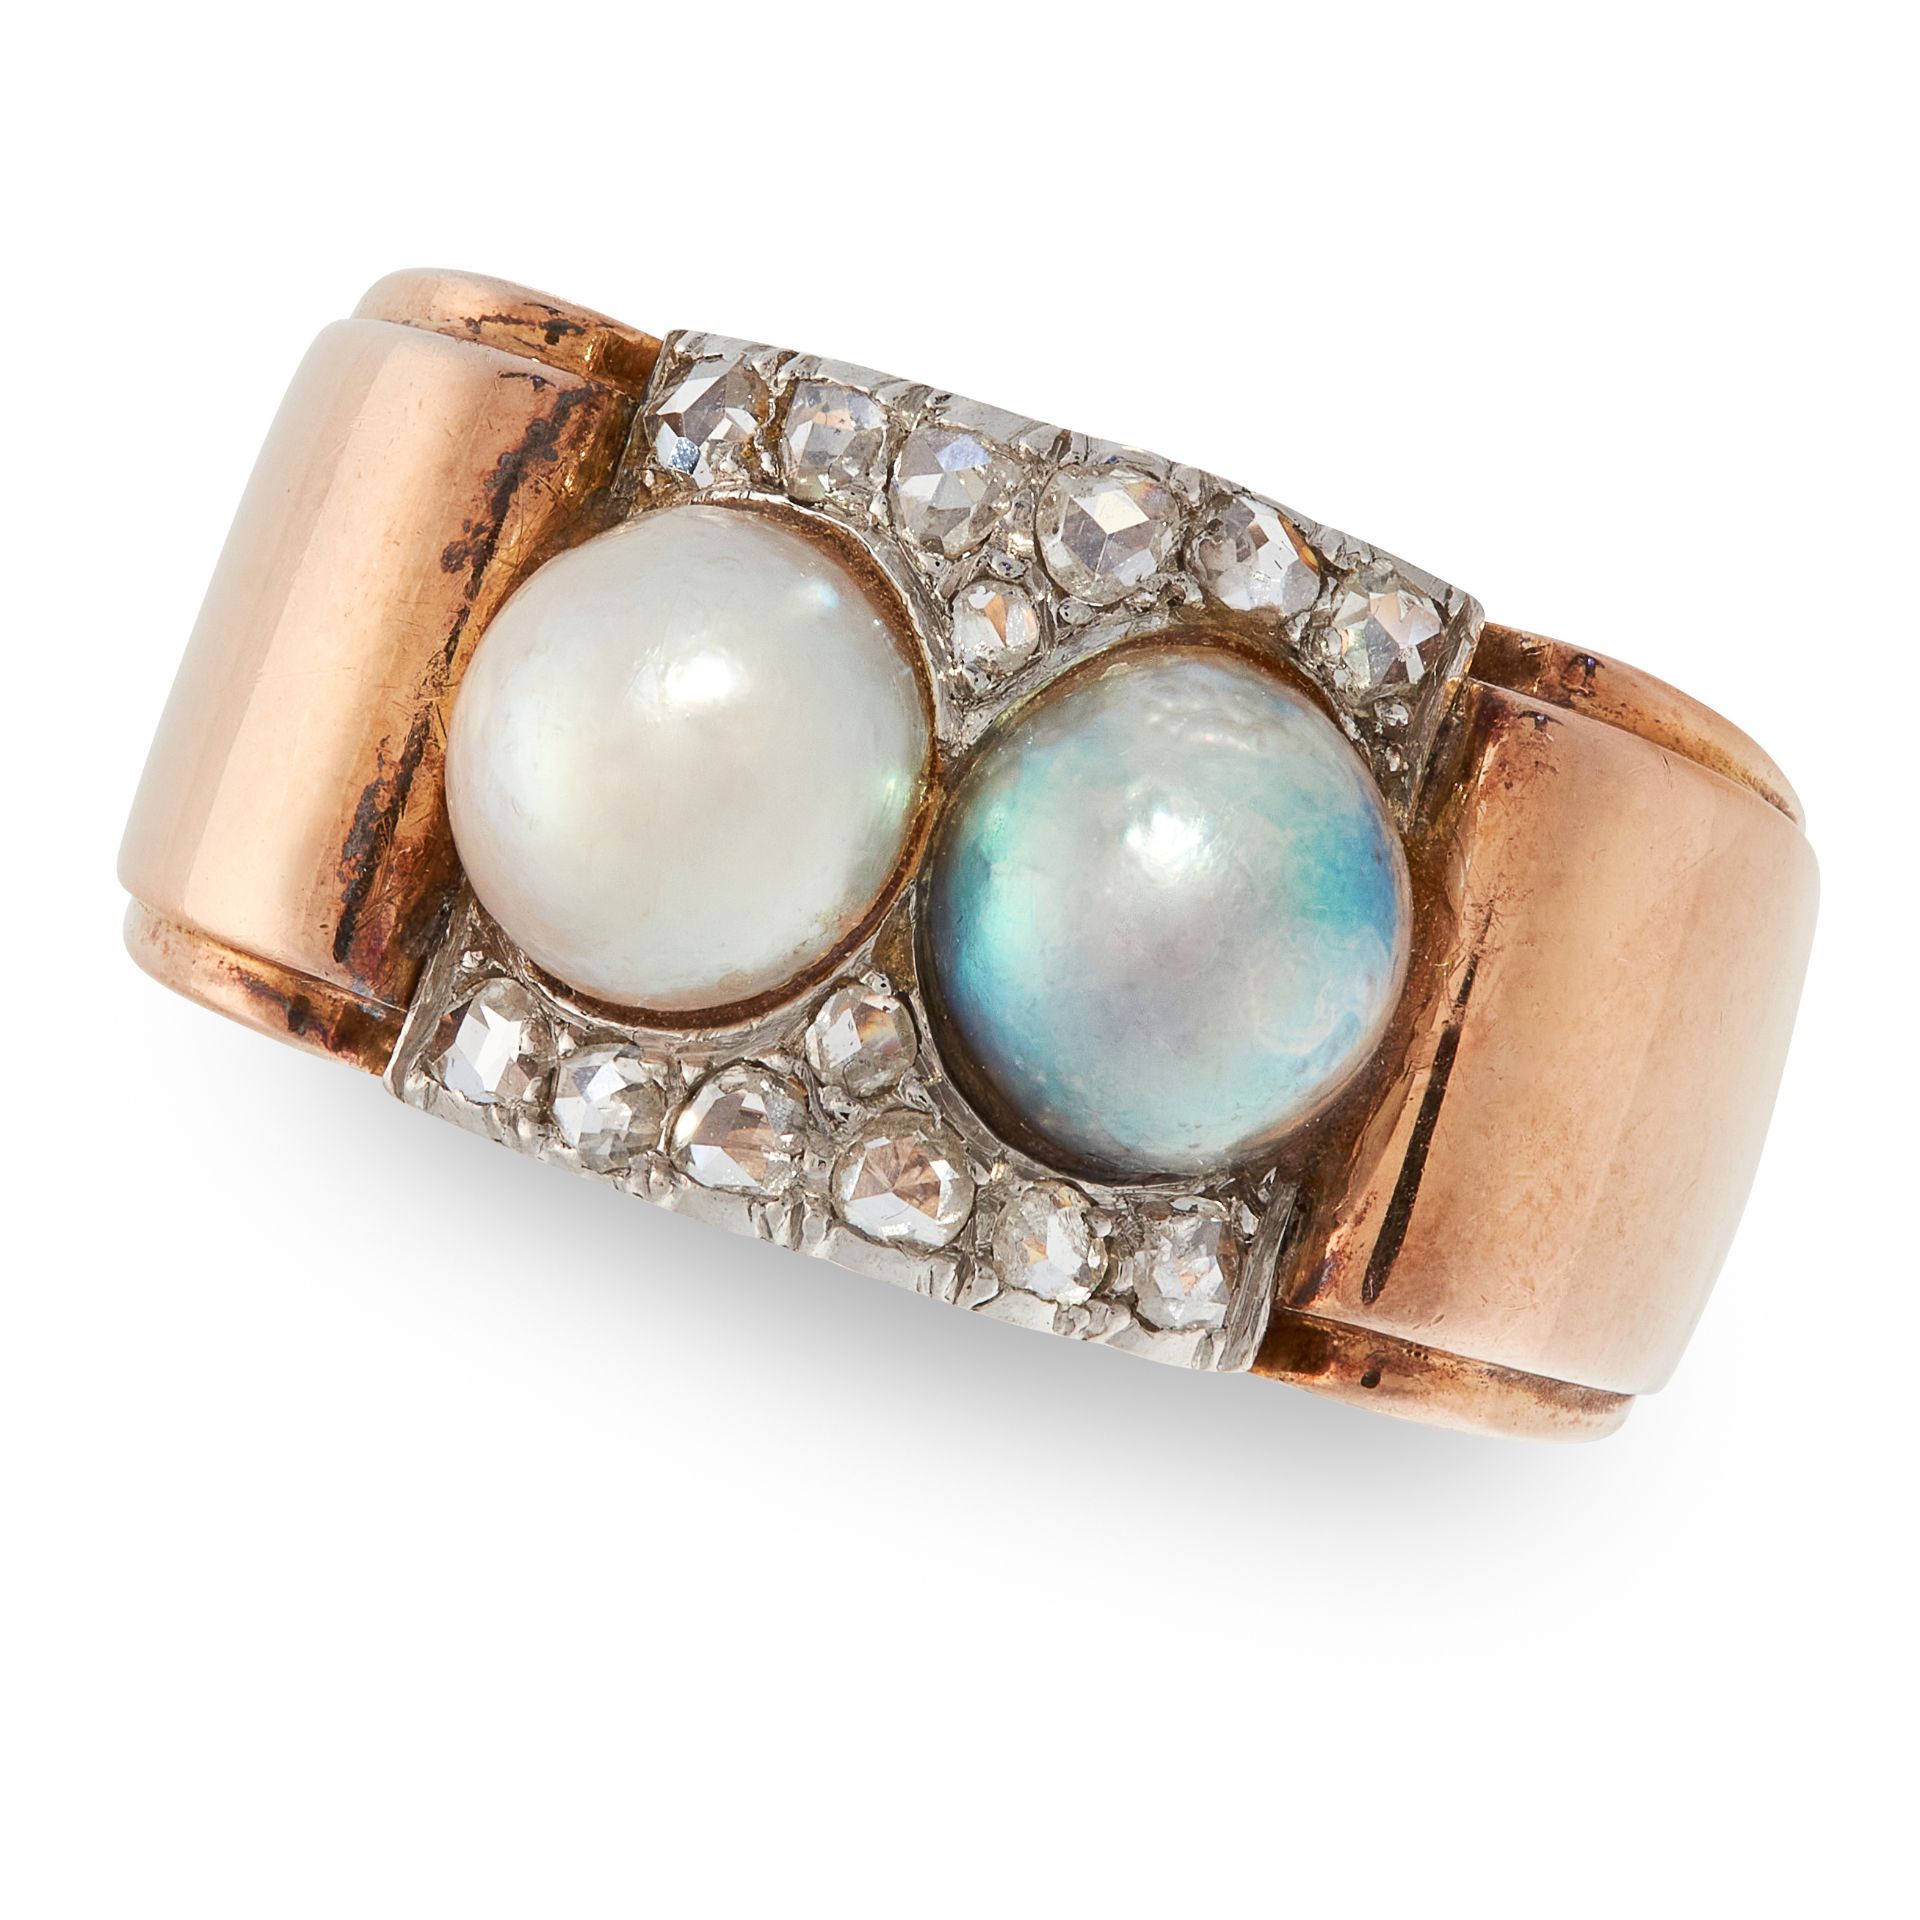 A RETRO PEARL AND DIAMOND RING in yellow gold, the band is set with two pearls in a border of rose